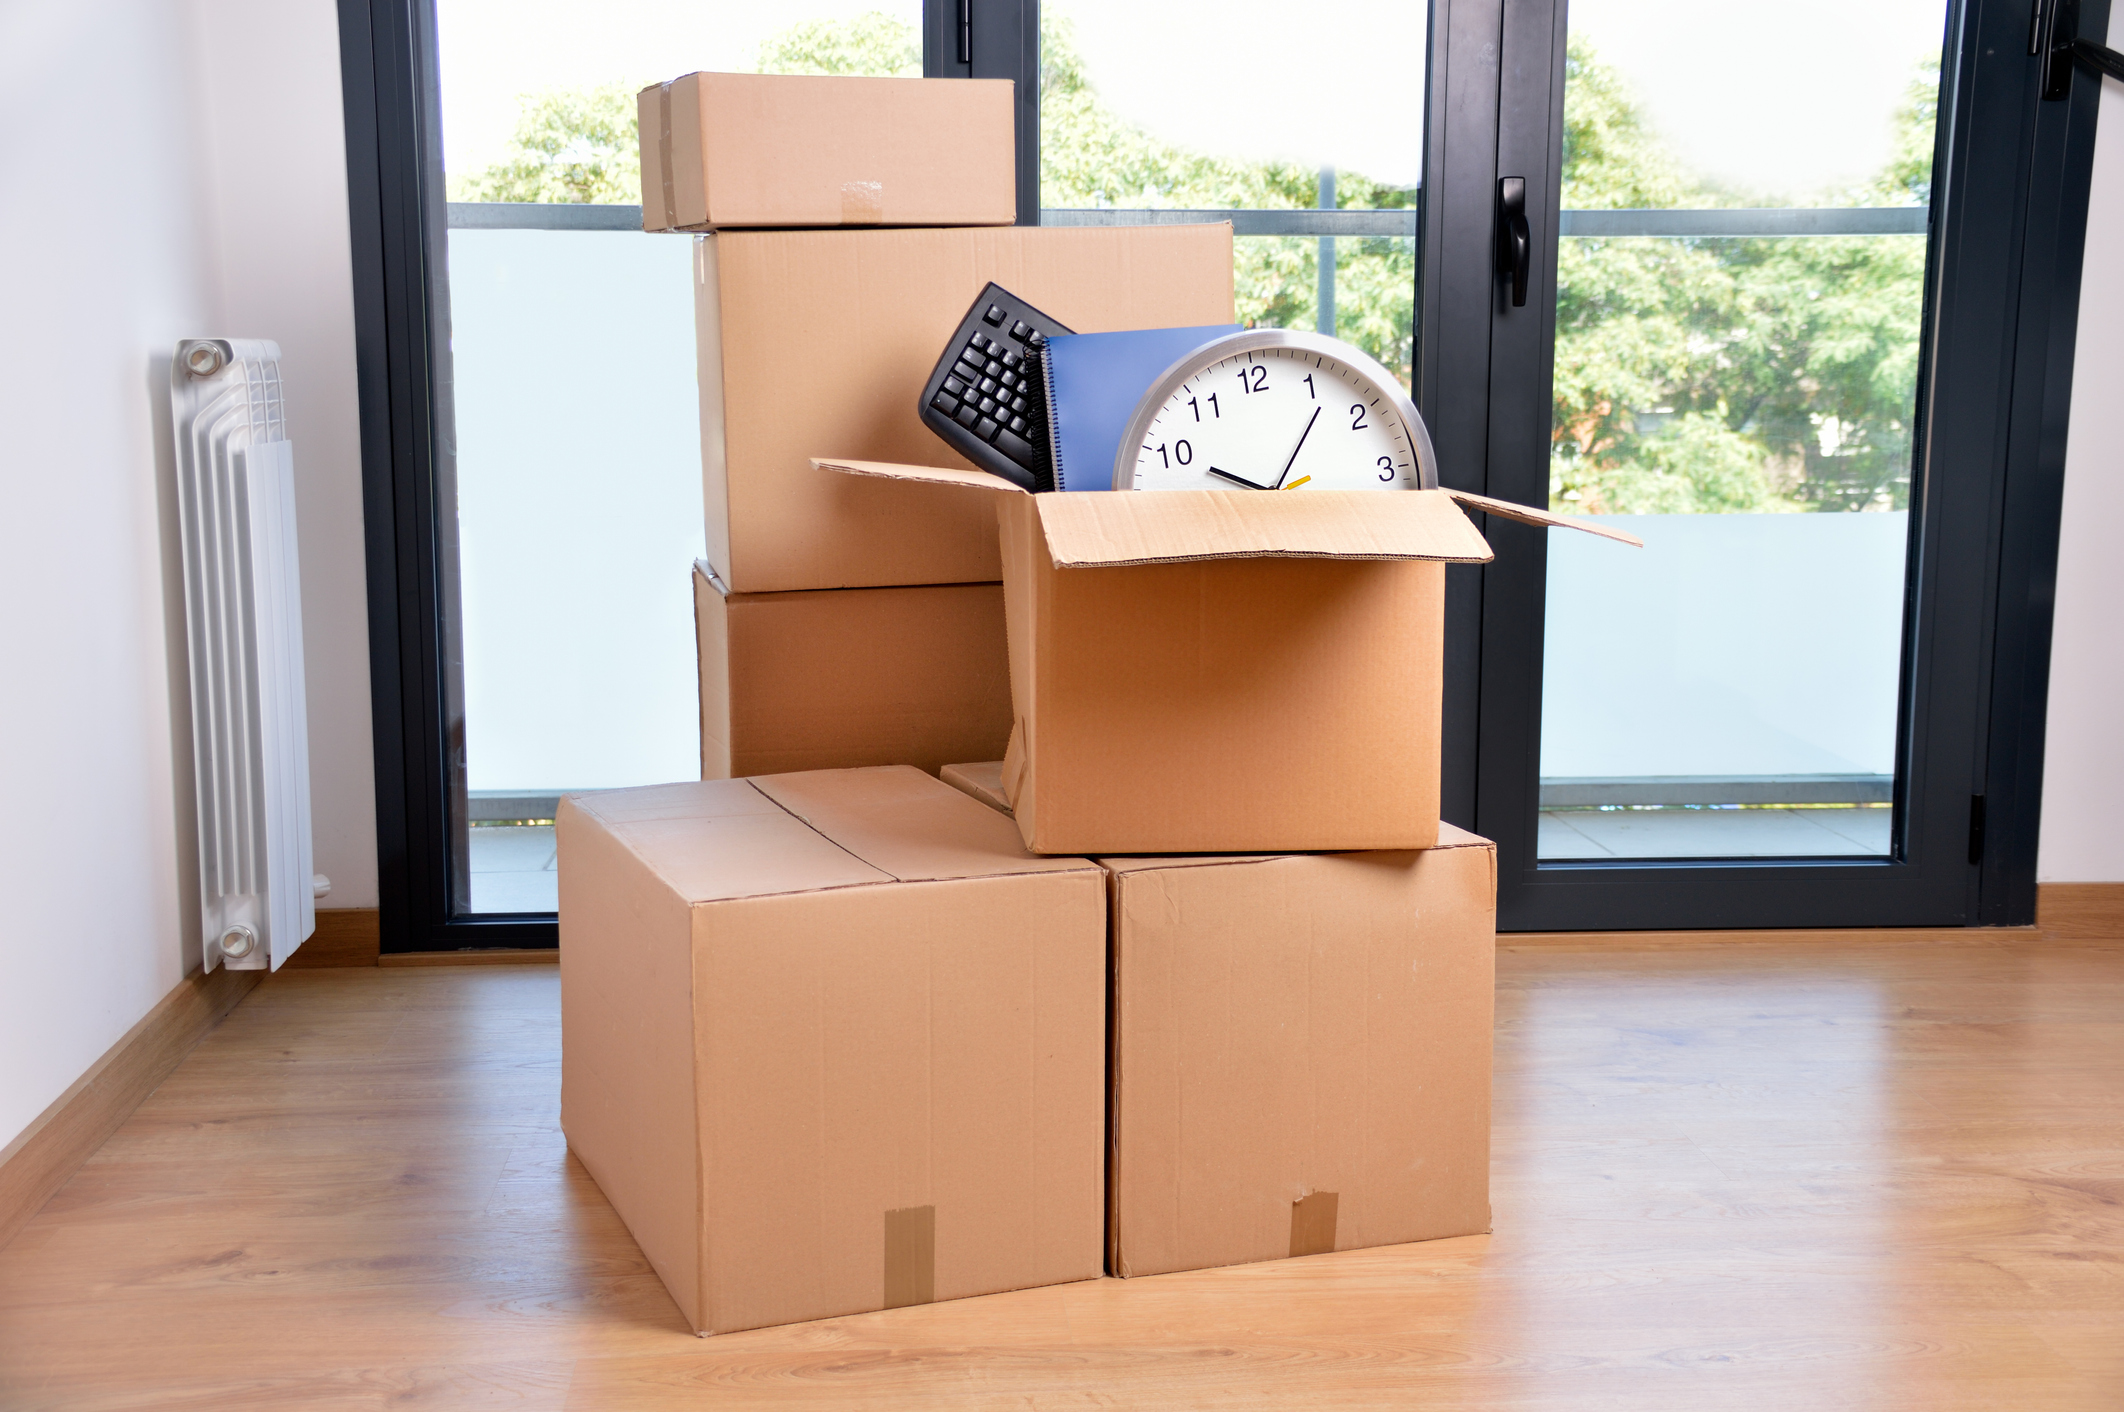 5 Top Storage Tips for Downsizing